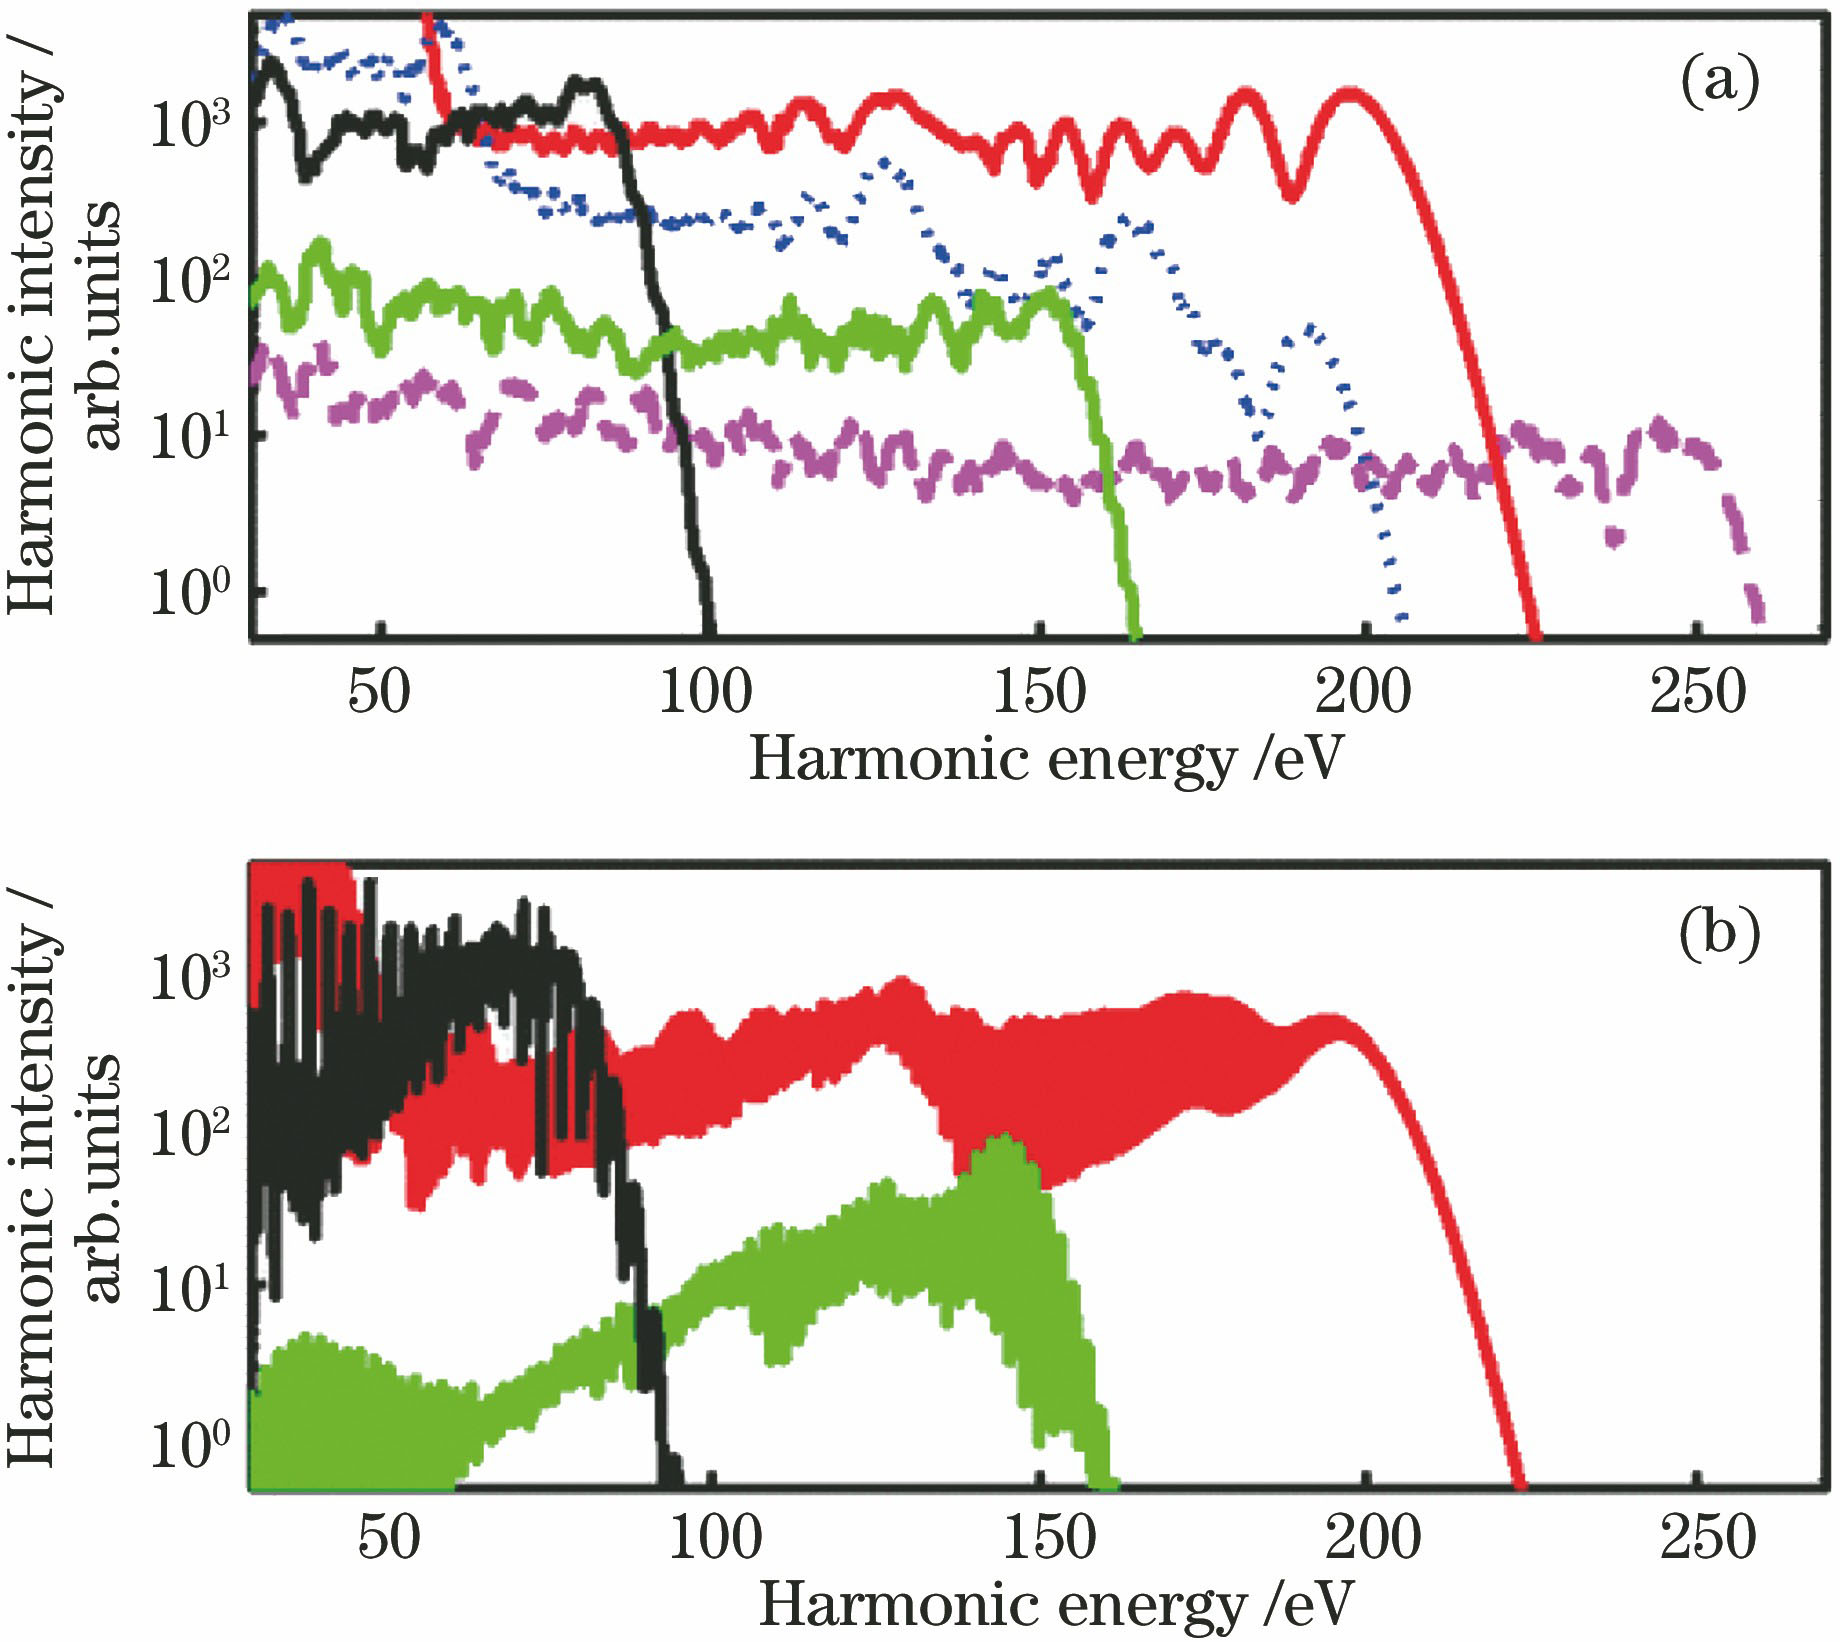 High-order harmonic spectrum (red) driven by sub-periodic “perfect” waveform.(a) Single active electron calculations;(b) full propagation calculations